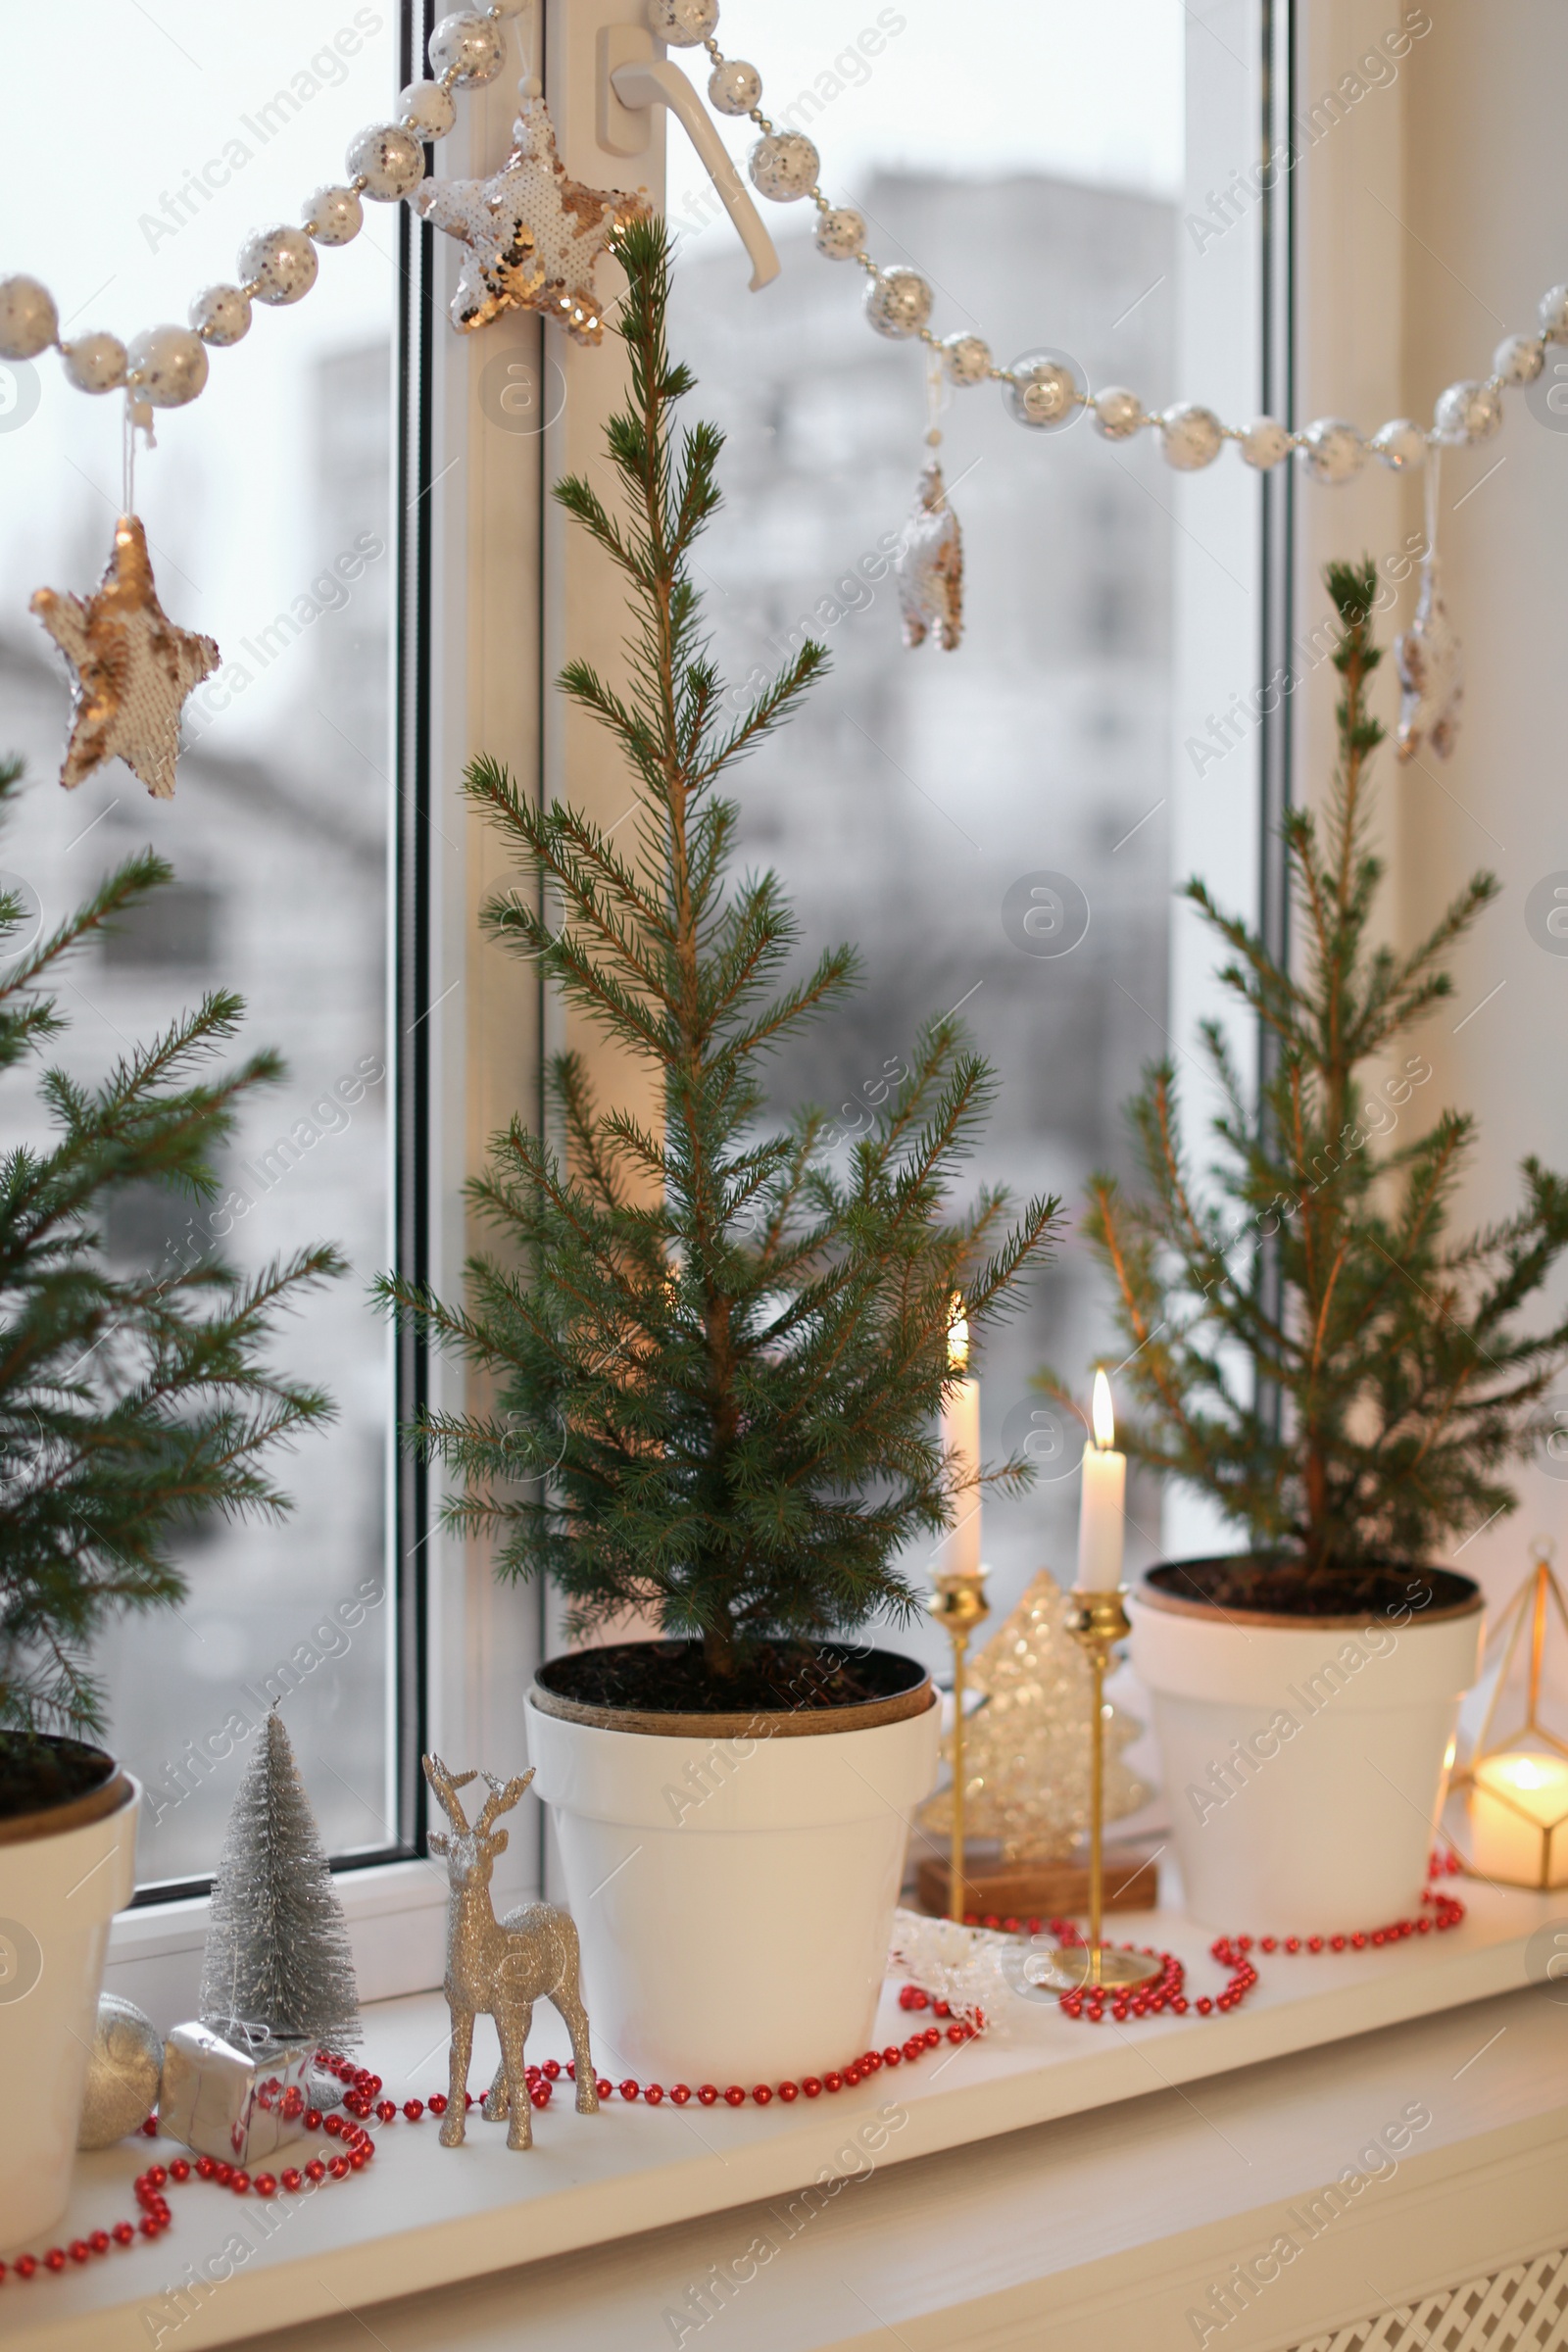 Photo of Small potted fir trees and Christmas decor on window sill indoors